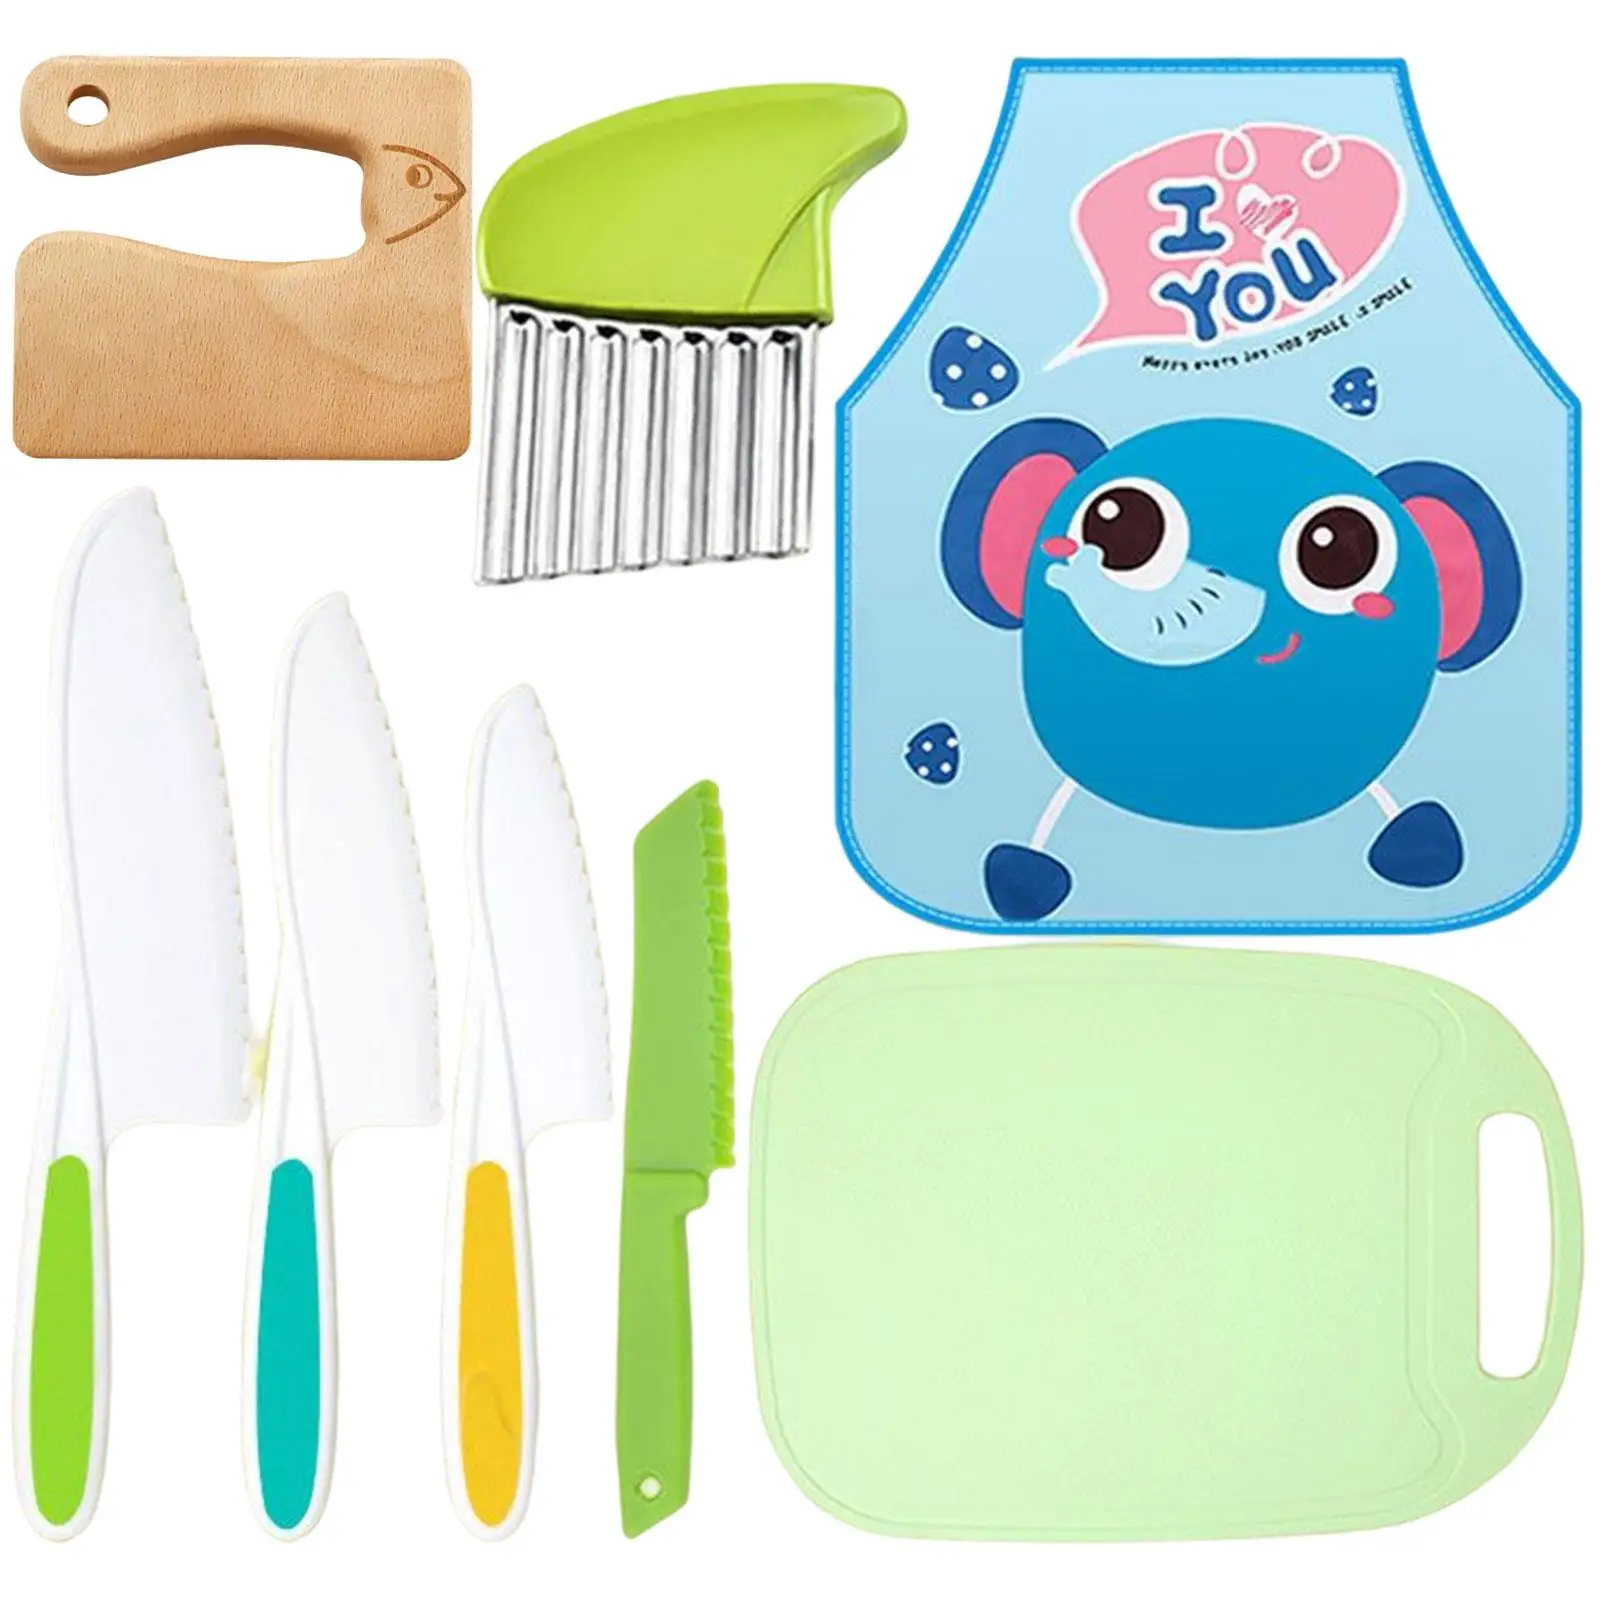 Kids Cooking Set Cooking Toys Cutting Board for Birthday Children Gifts